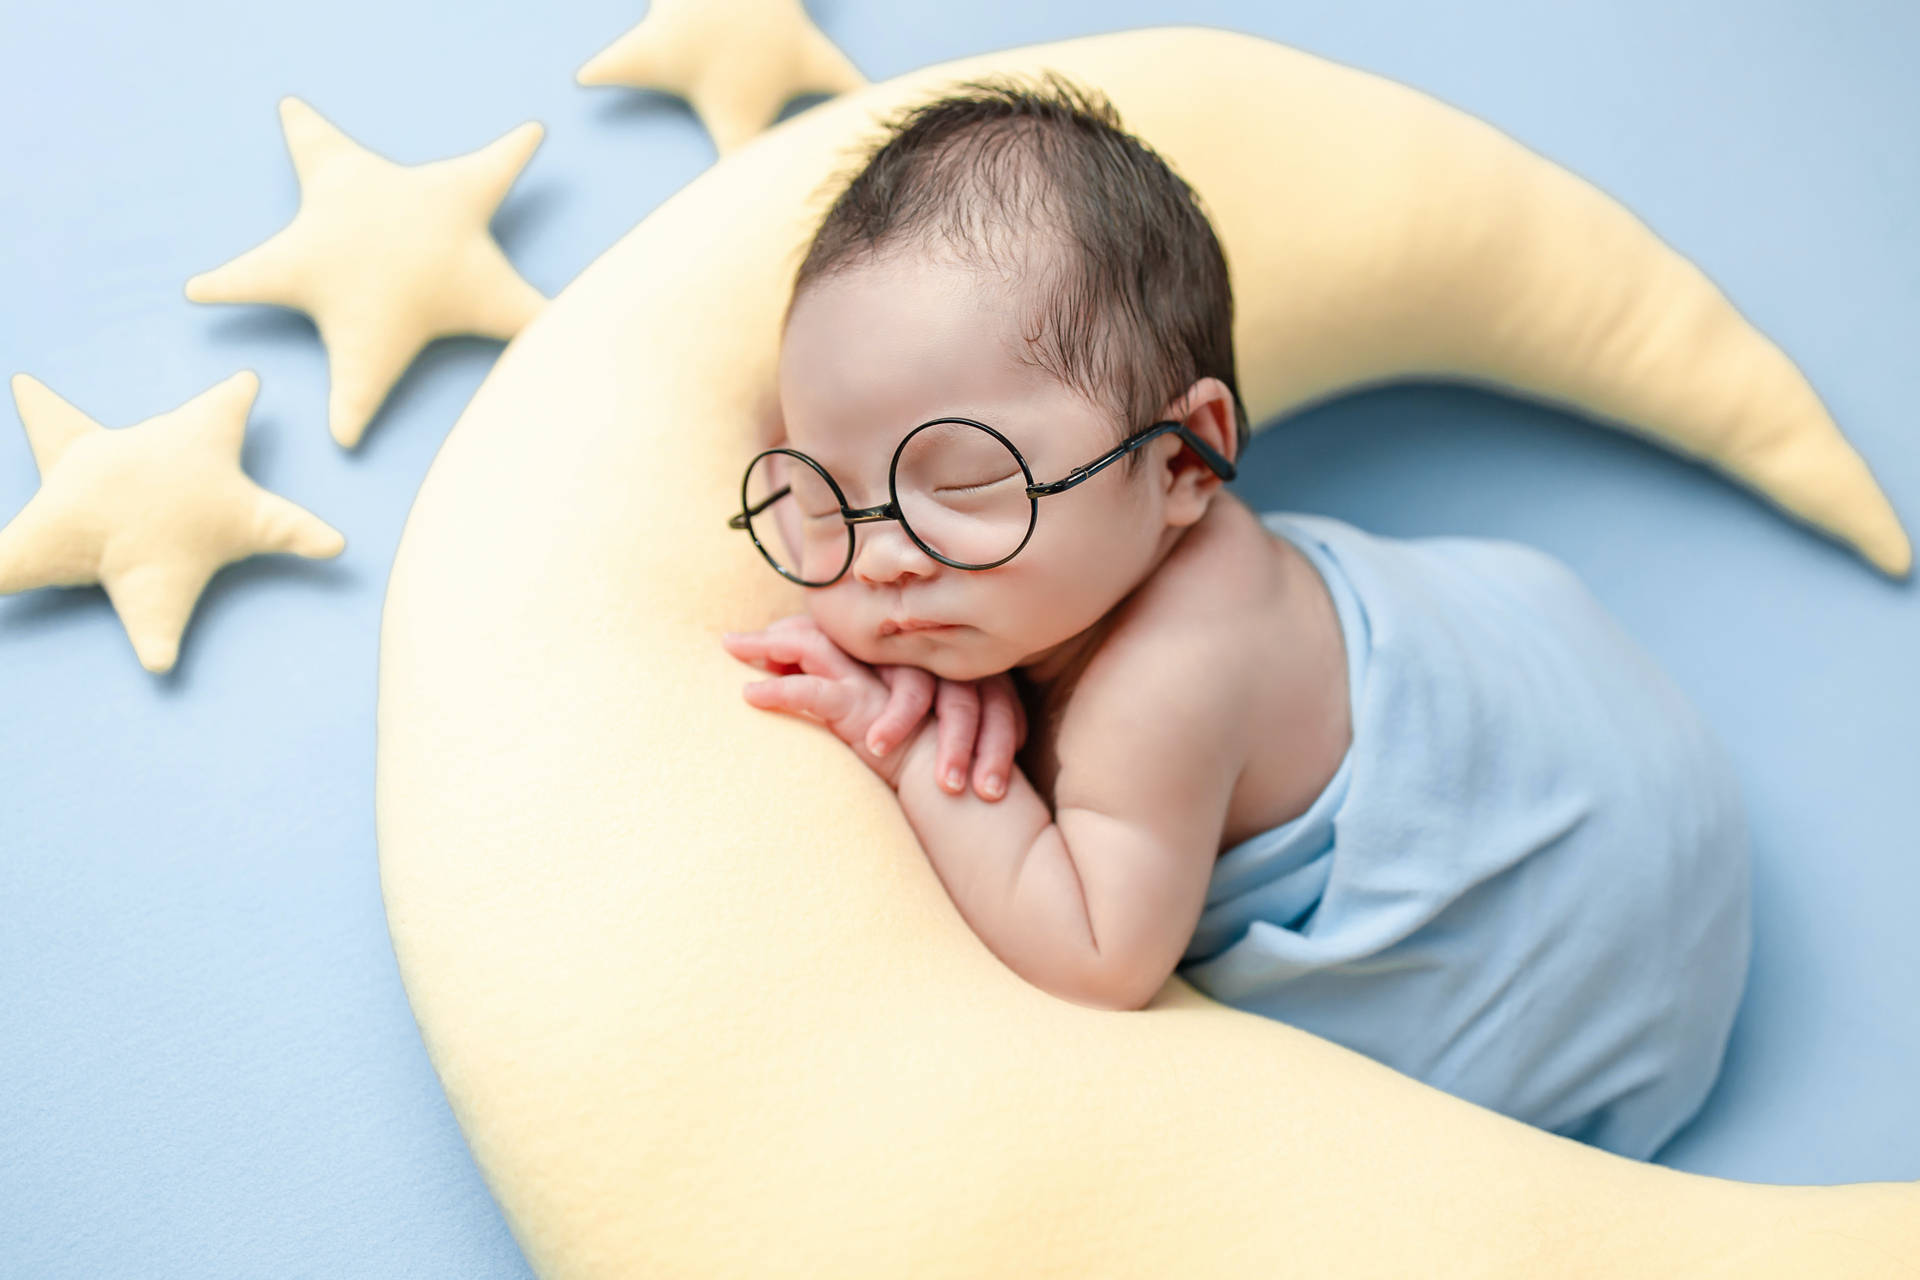 Very Cute Baby With Glasses